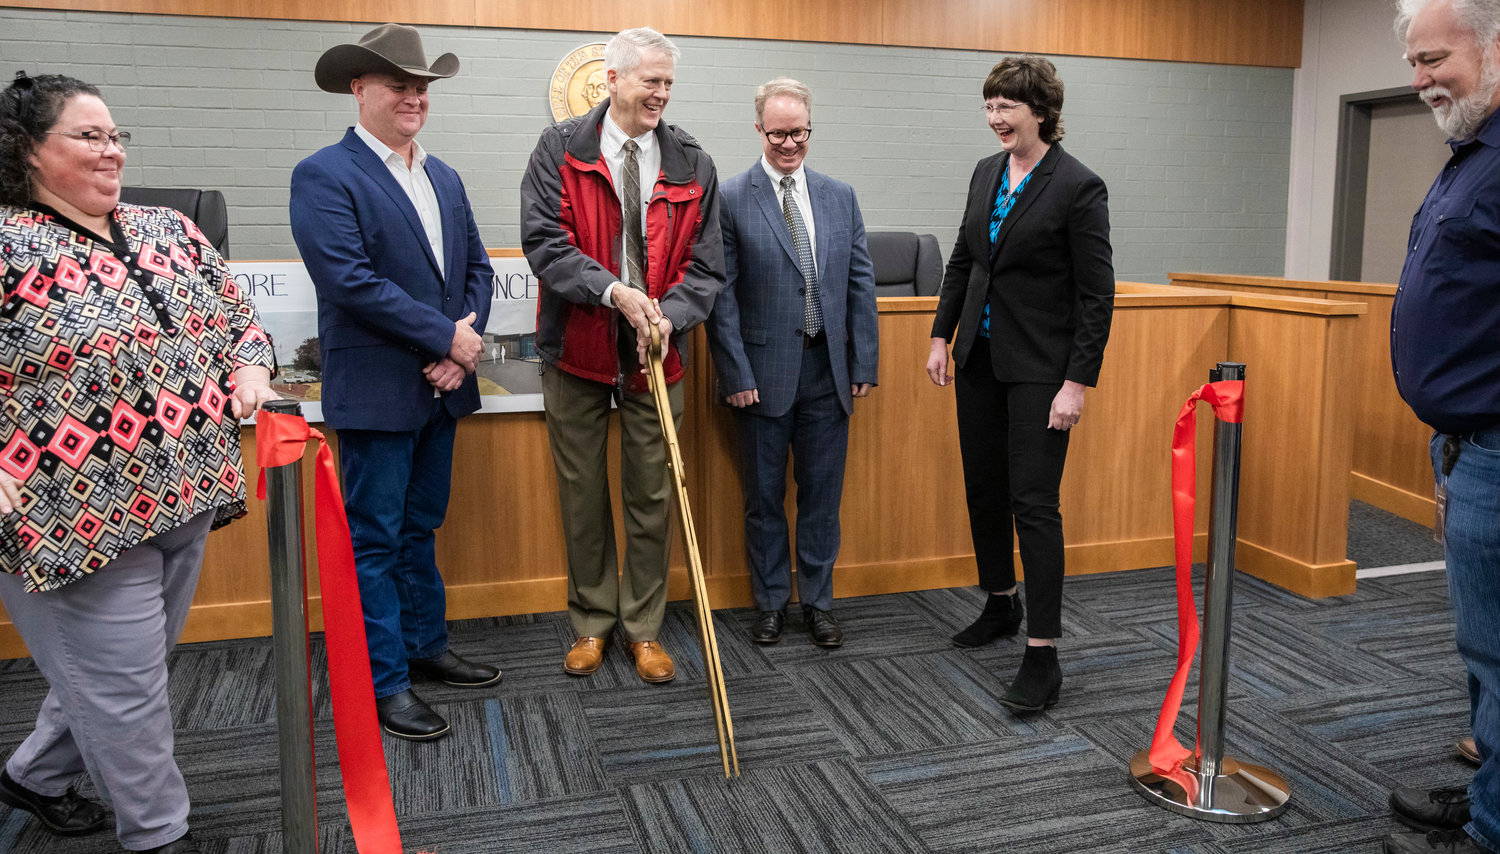 From left, Commissioner Scott Brummer, Judge James W. Lawler, Judge J. Andrew Toynbee and Commissioner Lindsey Pollock smile after a ribbon cutting ceremony at the Lewis County Juvenile Justice Center in Chehalis Friday morning.